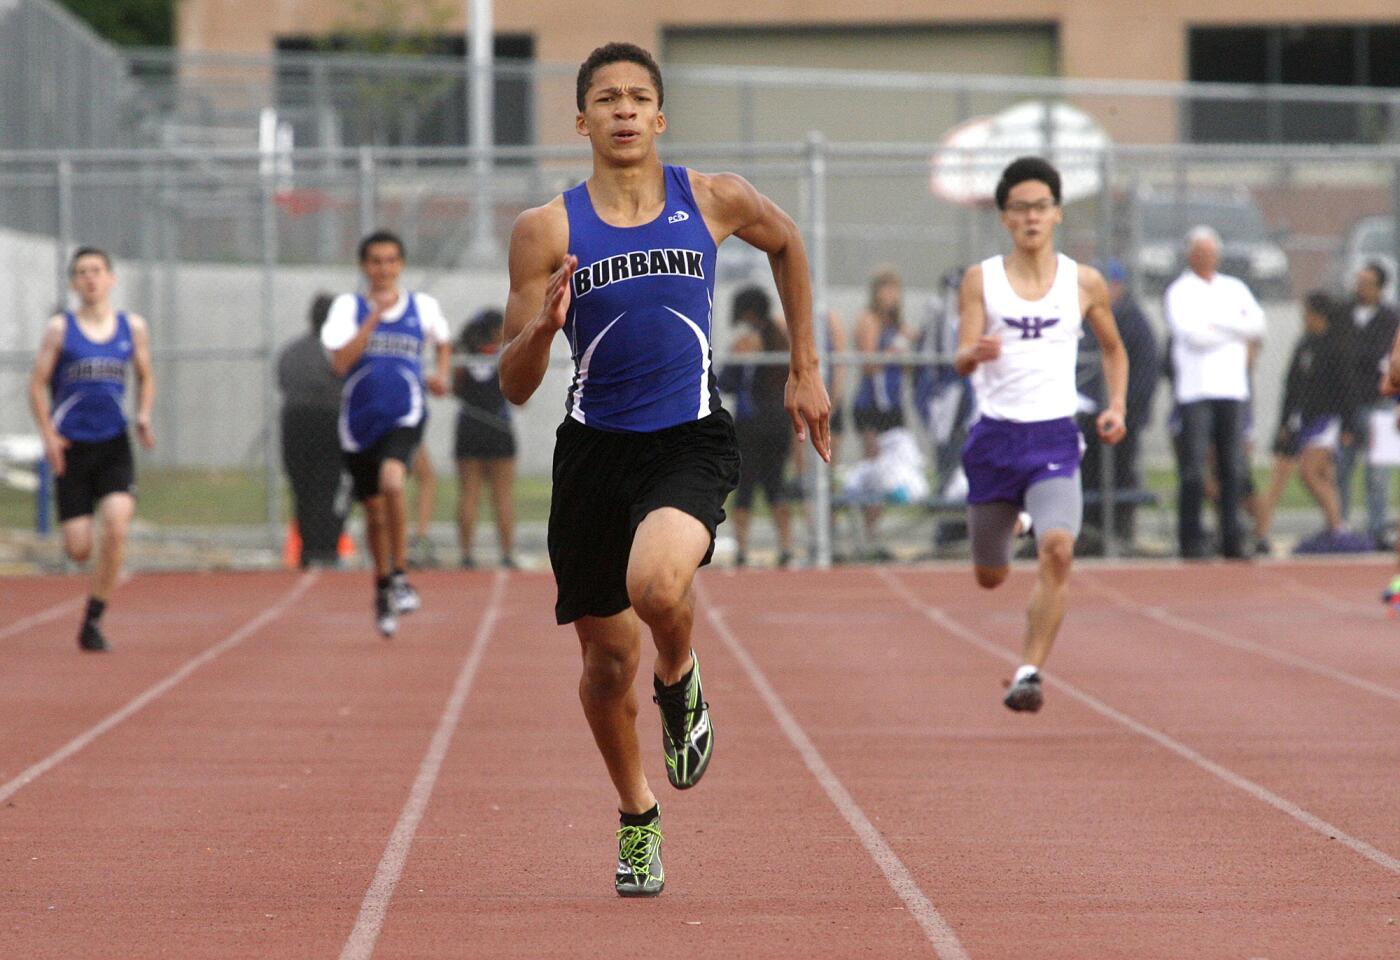 Burbank freshman Josh Cantong, 14, runs away from the field in the 400-meter with a time of 51:06 against Hoover in a Pacific League dual track and field meet at Burbank High School on Thursday, March 7, 2013.